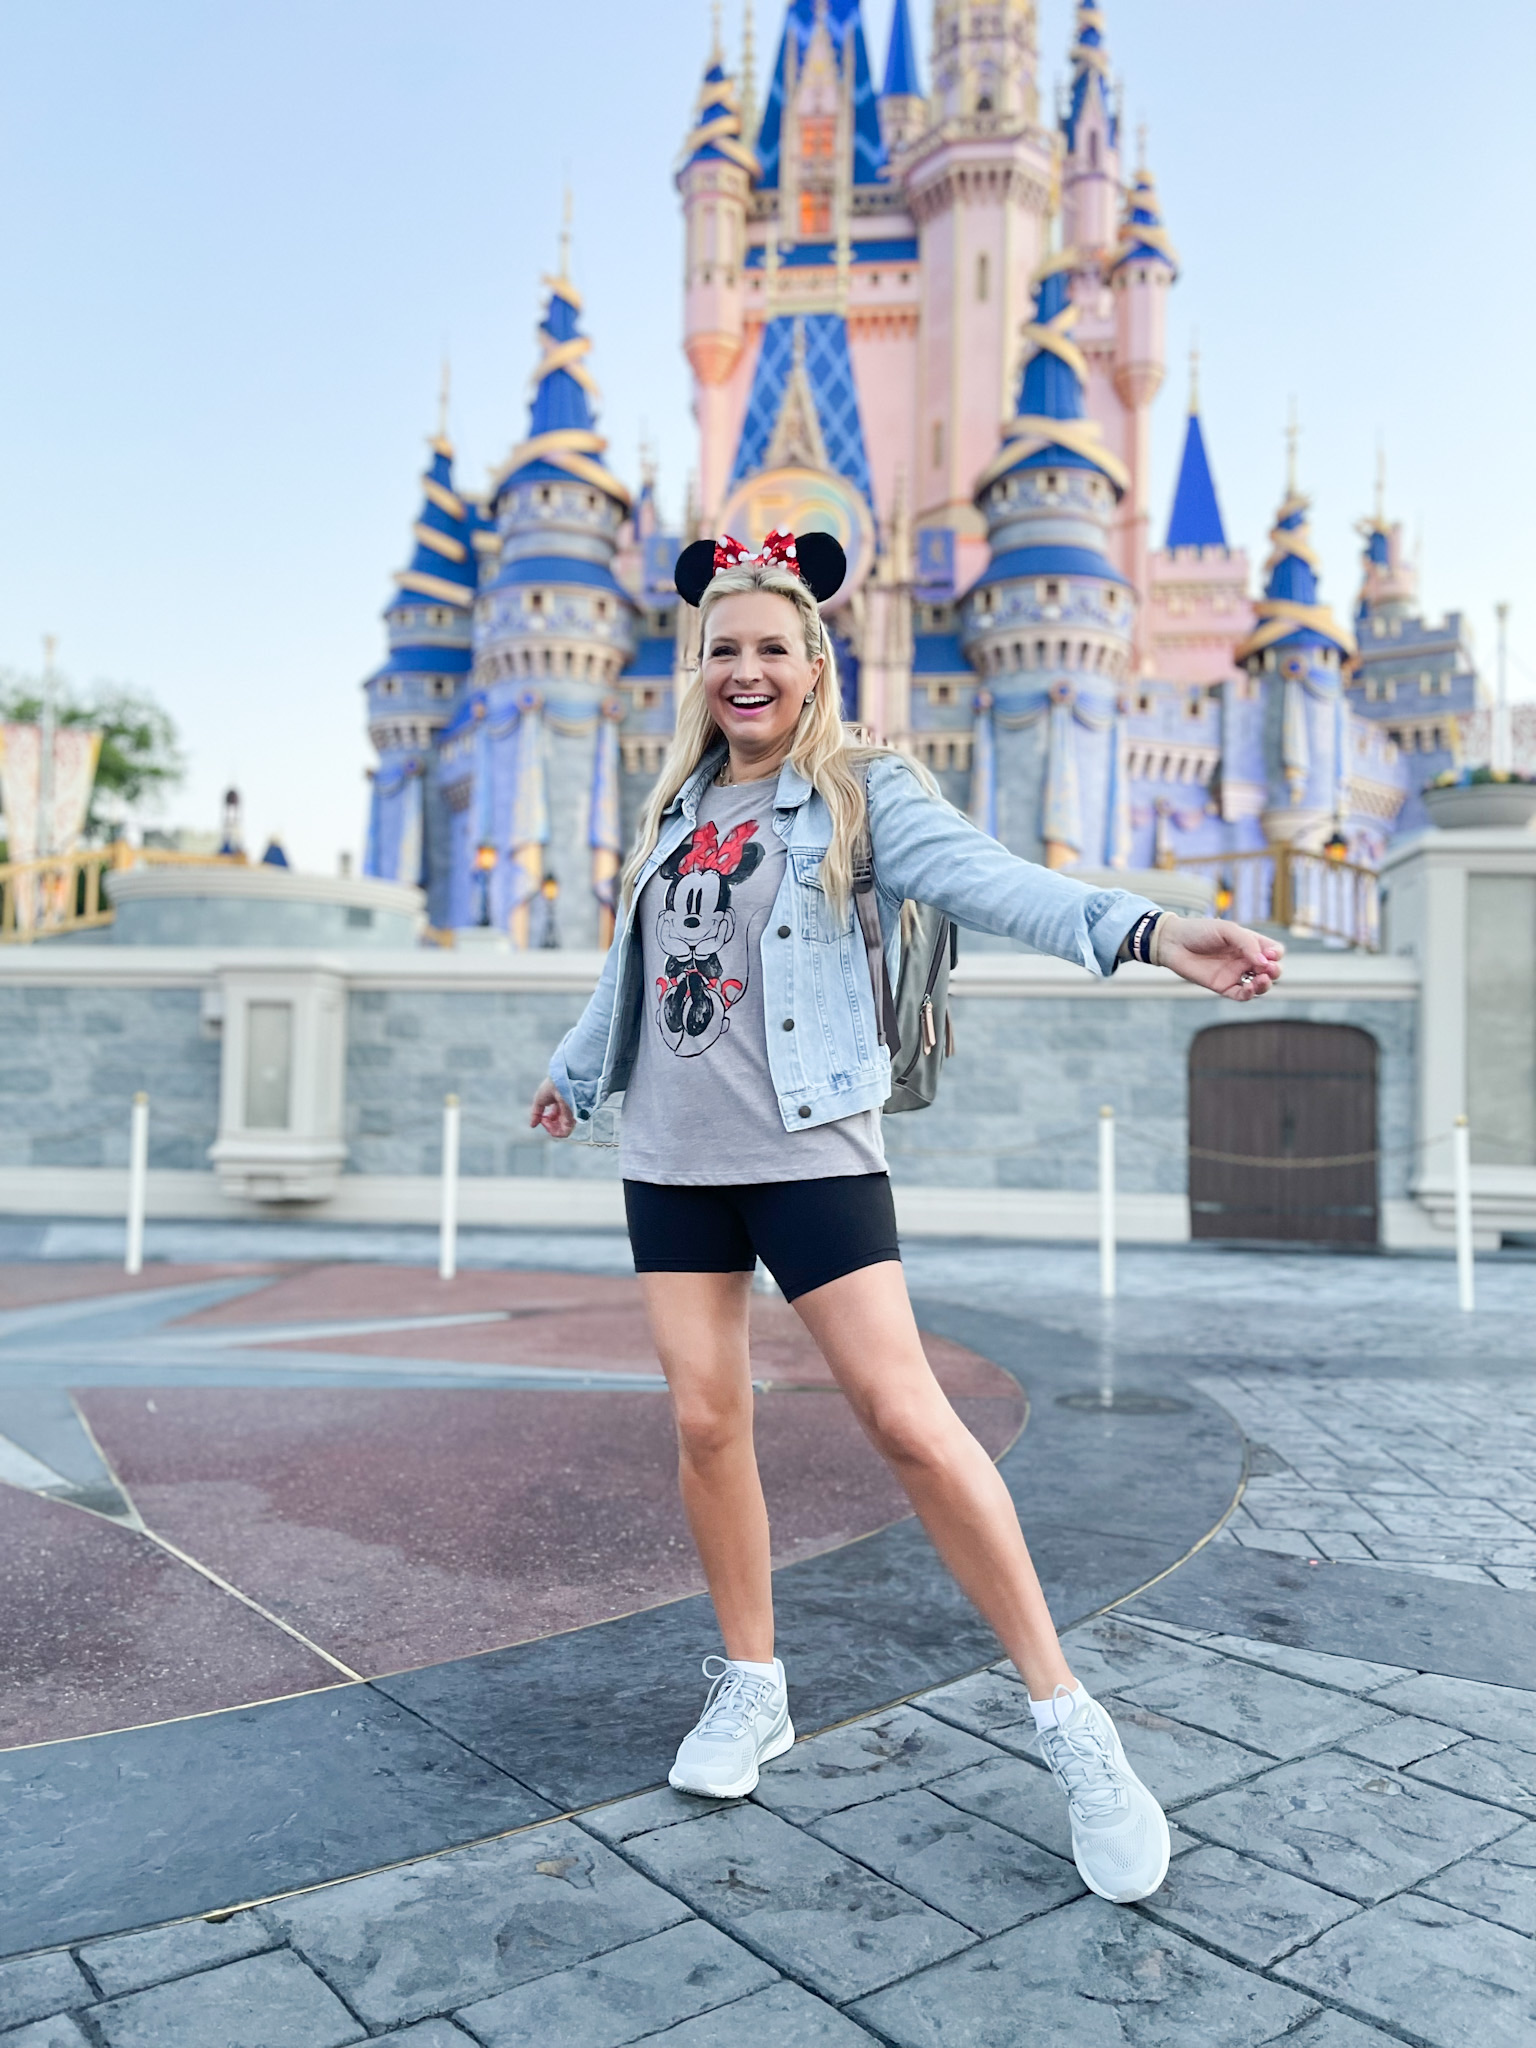 Disney Style  Disney outfits women, Theme park outfits, Disneyland outfits